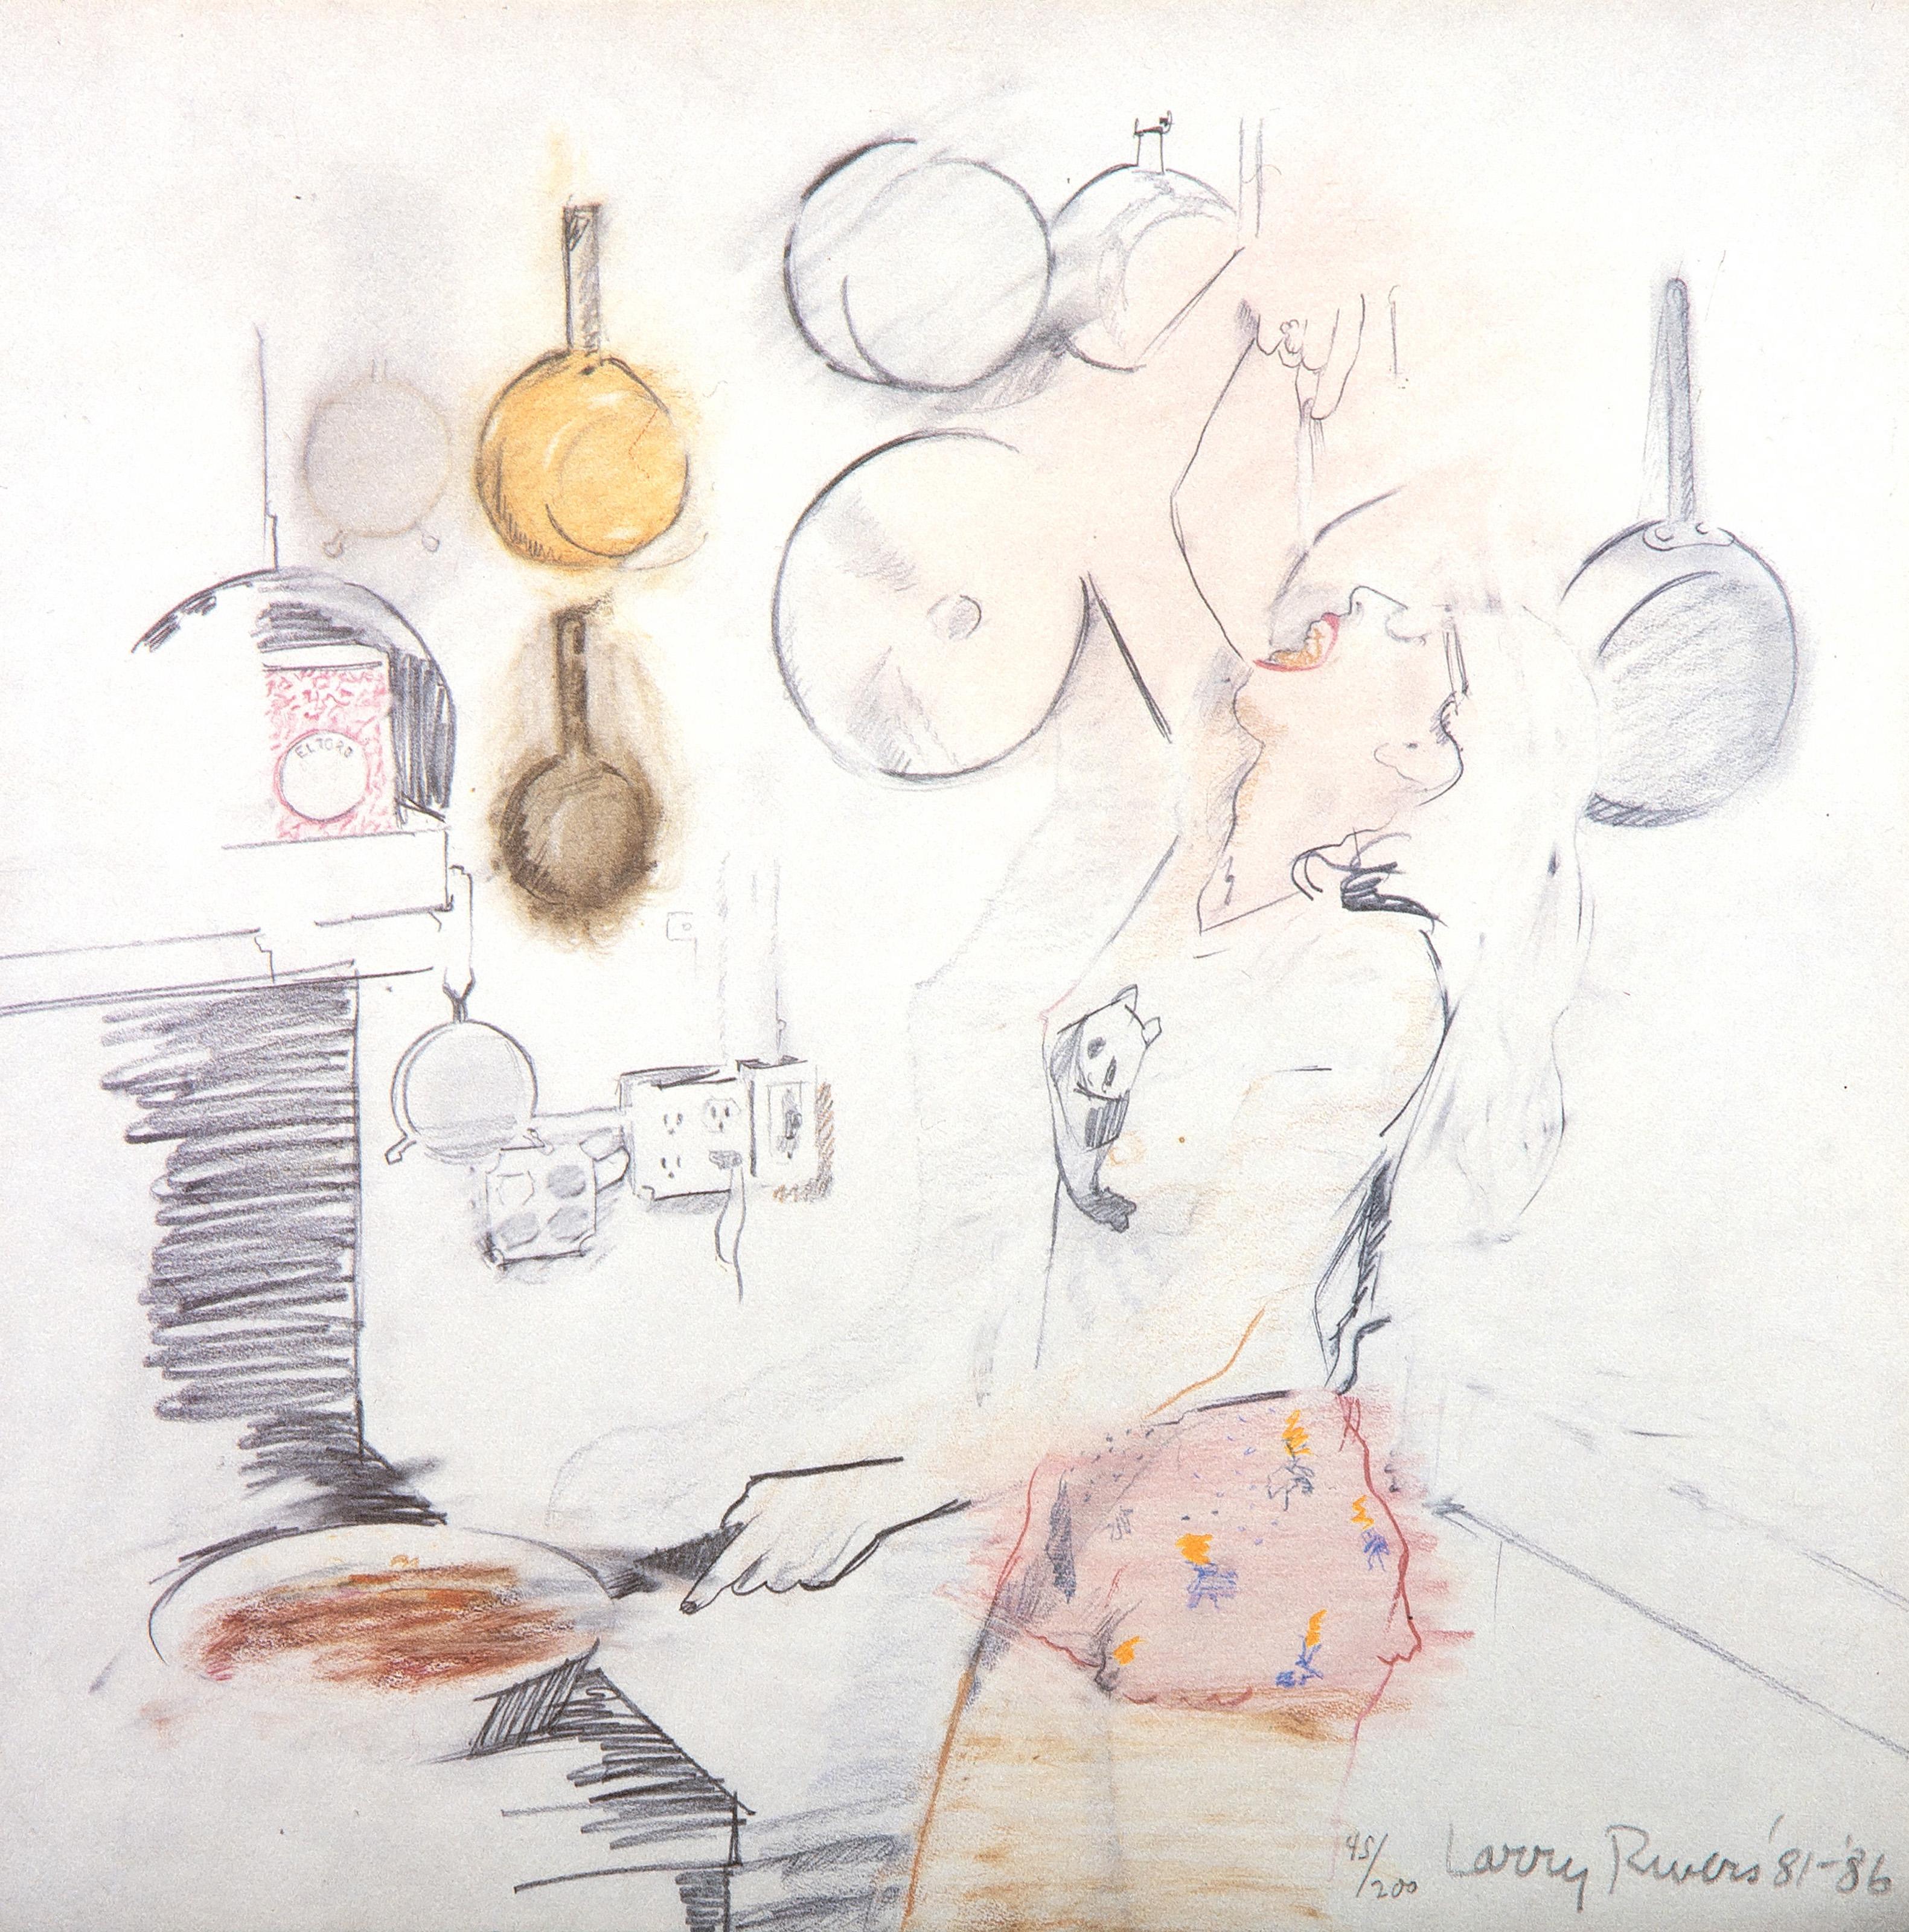 Larry Rivers, American (1923 - 2002) -  Kitchen. Portfolio: Art Sounds Portfolio, Year: 1986, Medium: Lithograph, signed, numbered and dated in pencil, Edition: 45/200, Size: 12 x 12 in. (30.48 x 30.48 cm), Publisher: Akim International Arts, Inc.